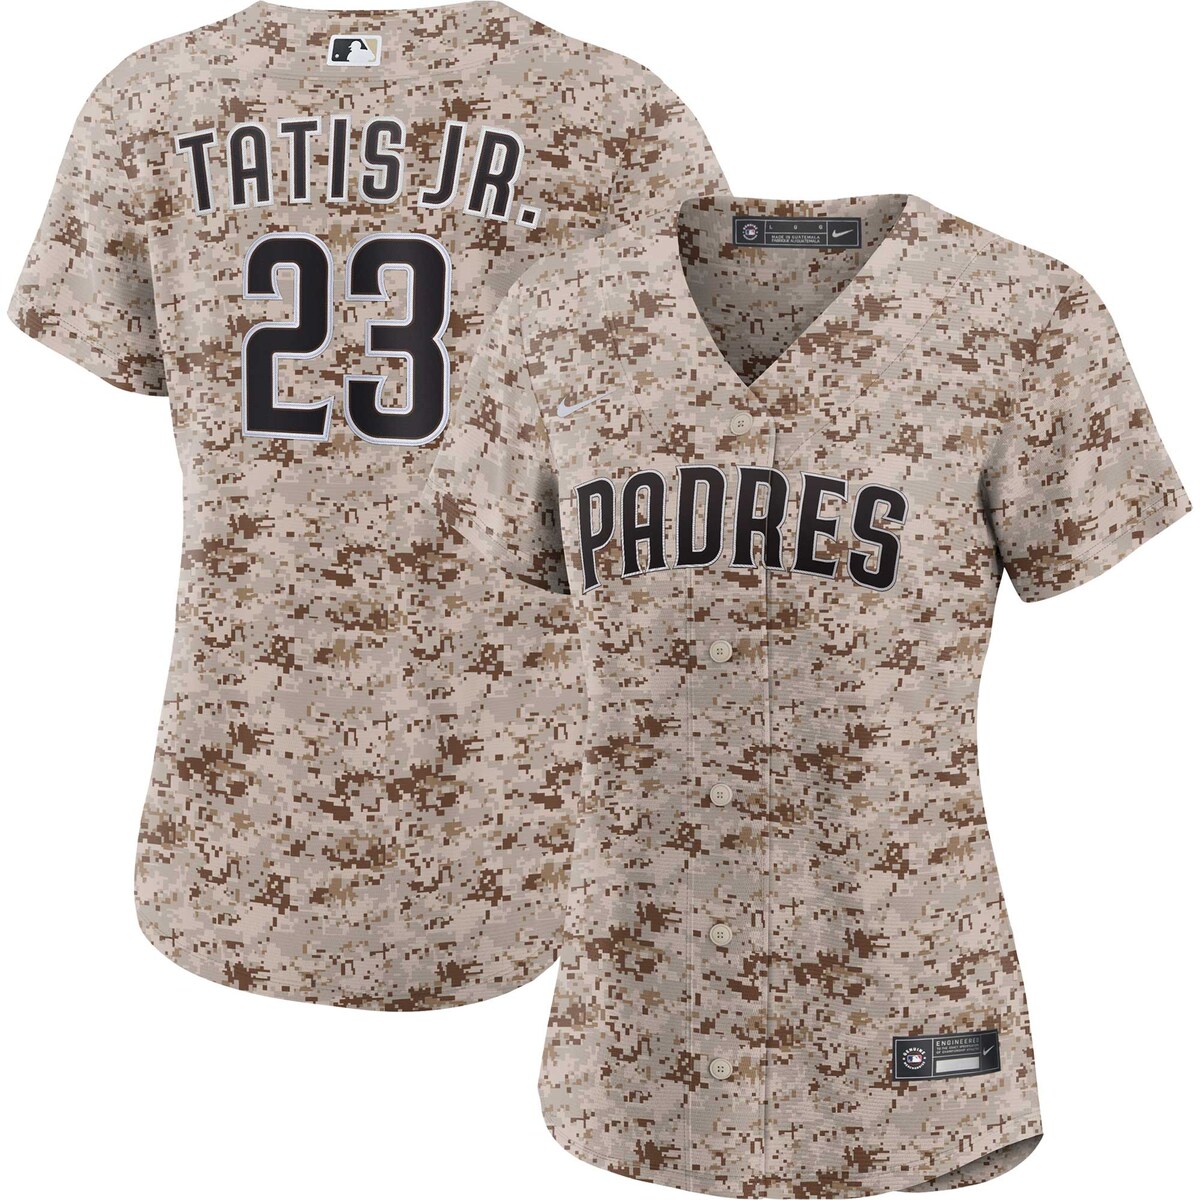 You're the type of San Diego Padres fan who counts down the minutes until the first pitch. When your squad finally hits the field, show your support all game long with this Fernando Tatis Jr. USMC Replica Player jersey from Nike. Its classic full-button design features bold player and San Diego Padres applique graphics, leaving no doubt you'll be along for the ride for all 162 games and beyond this season.MLB Batterman logo on back neckOfficially licensedFull-button frontJersey Color Style: AlternateMachine wash, tumble dry lowStandard fitMaterial: 100% PolyesterBrand: NikeImportedShort sleeveHeat-applied twill team and player detailsReplicaRounded hem with satin woven jock tag